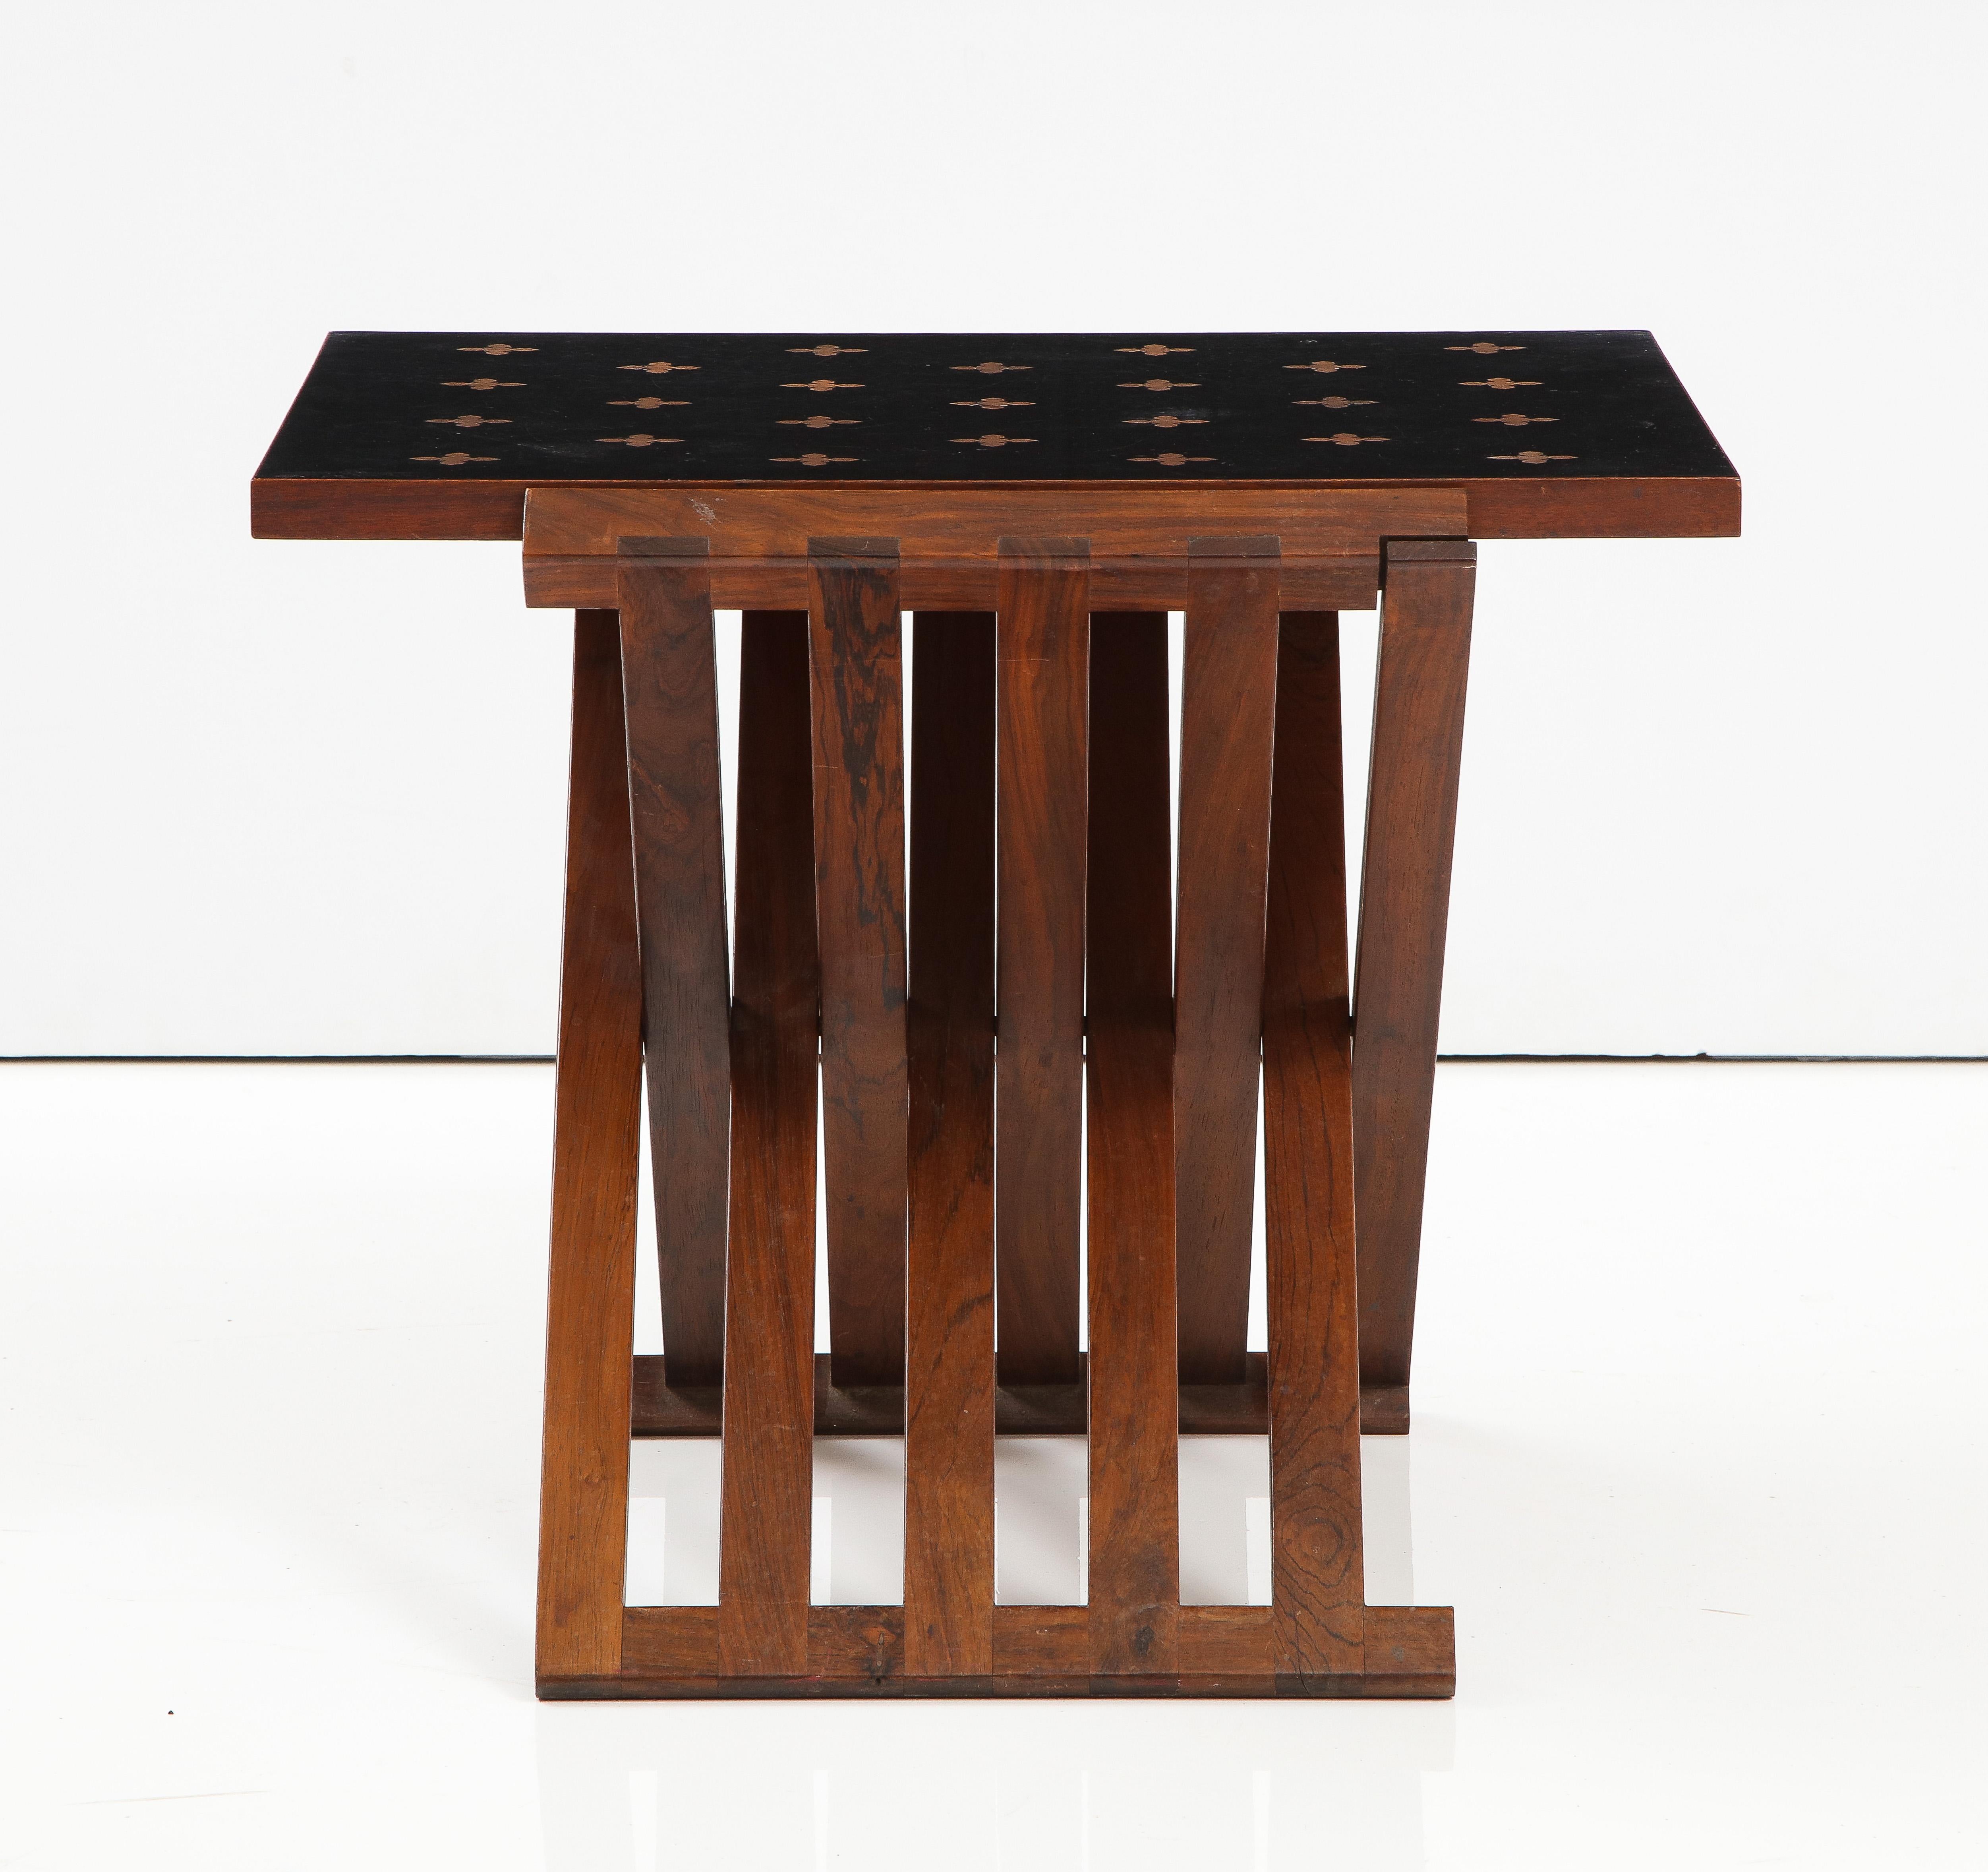 Edward Wormley design x-base folding side table for Dunbar, Model 5425. Made from the highest quality materials rosewood, walnut and a parquetry inlaid top handmade by the craftsman at Dunbar Furniture. A rare table that stands out in any interior